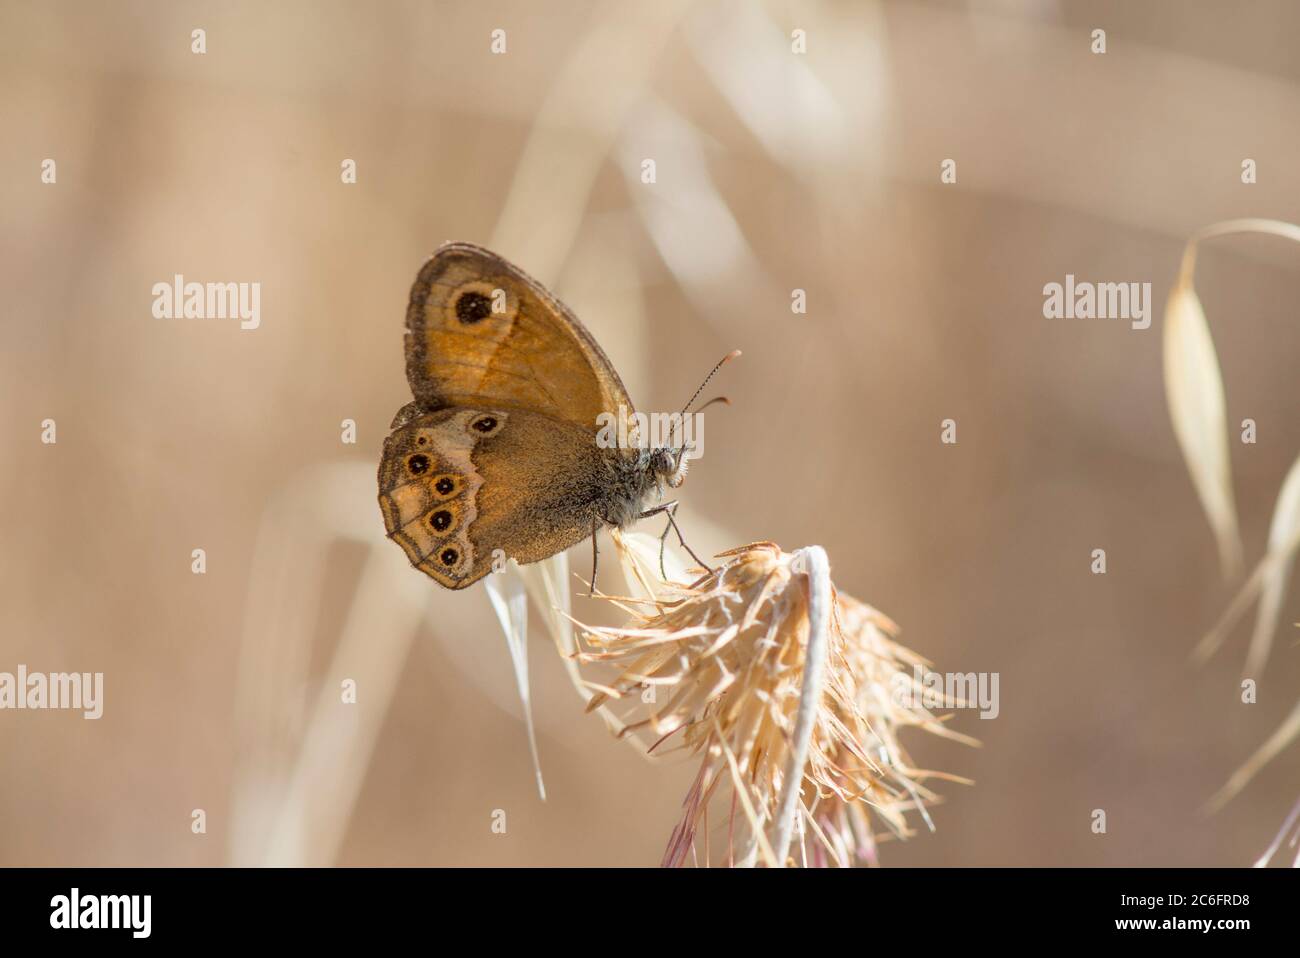 Dusky heath butterfly, Coenonympha dorus, resting on a dry thistle, Andalusia, Spain. Stock Photo